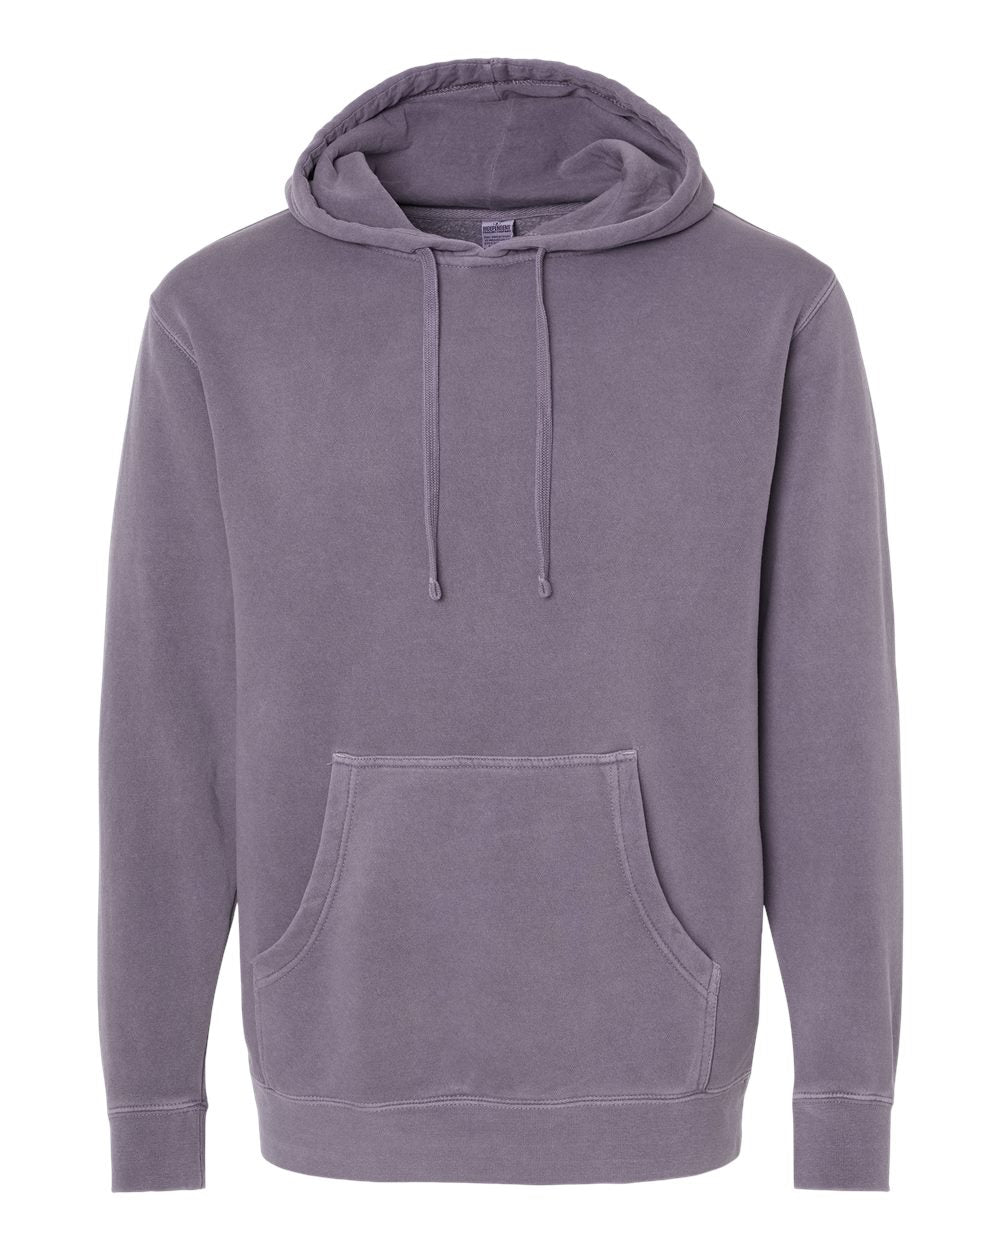 Independent Pigment-Dyed Hoodie (PRM4500) in Pigment Plum